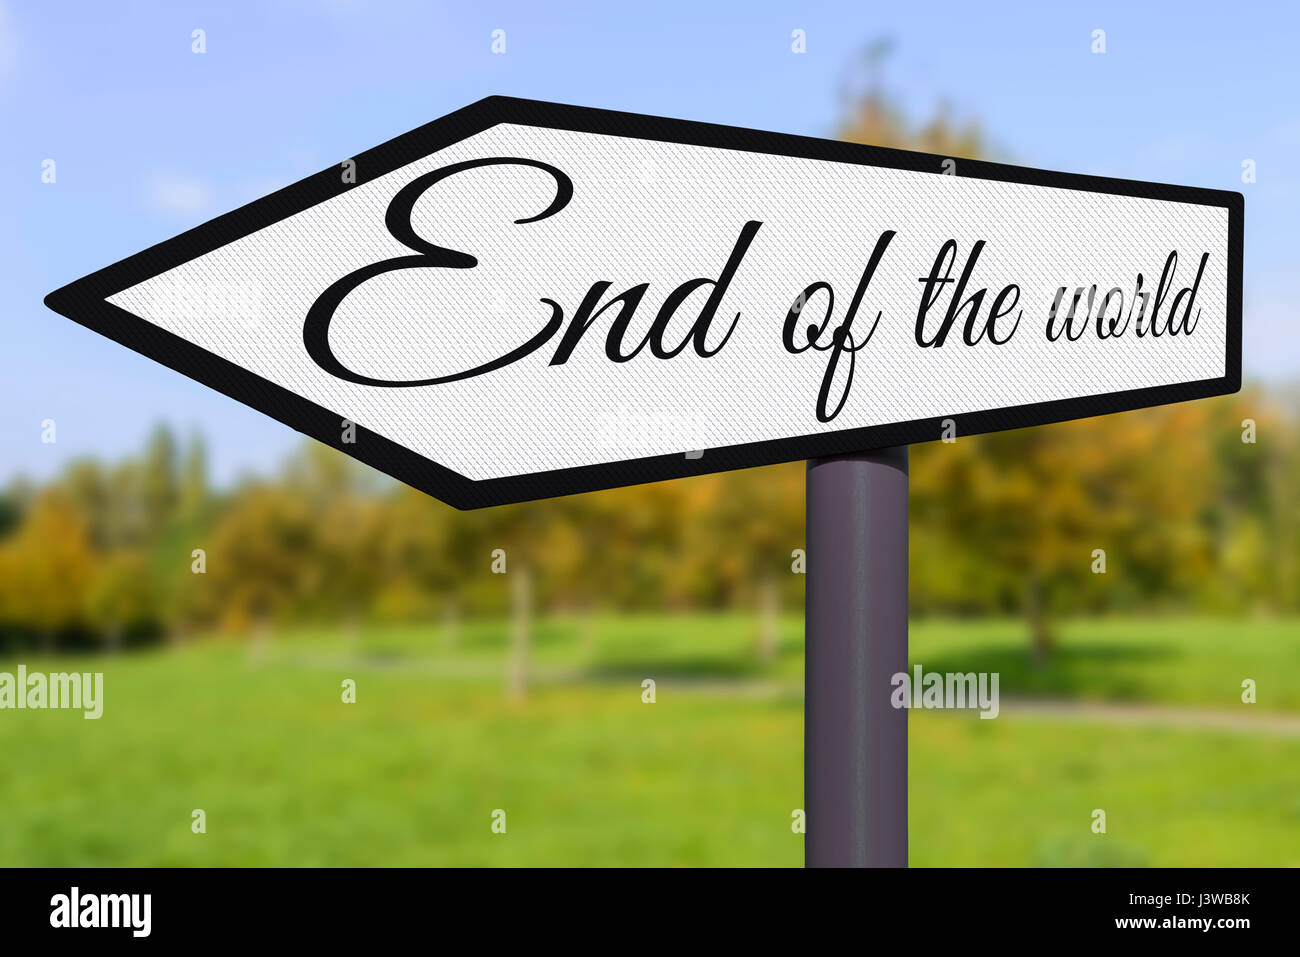 End of the world sign. End of the world concept sign. Stock Photo